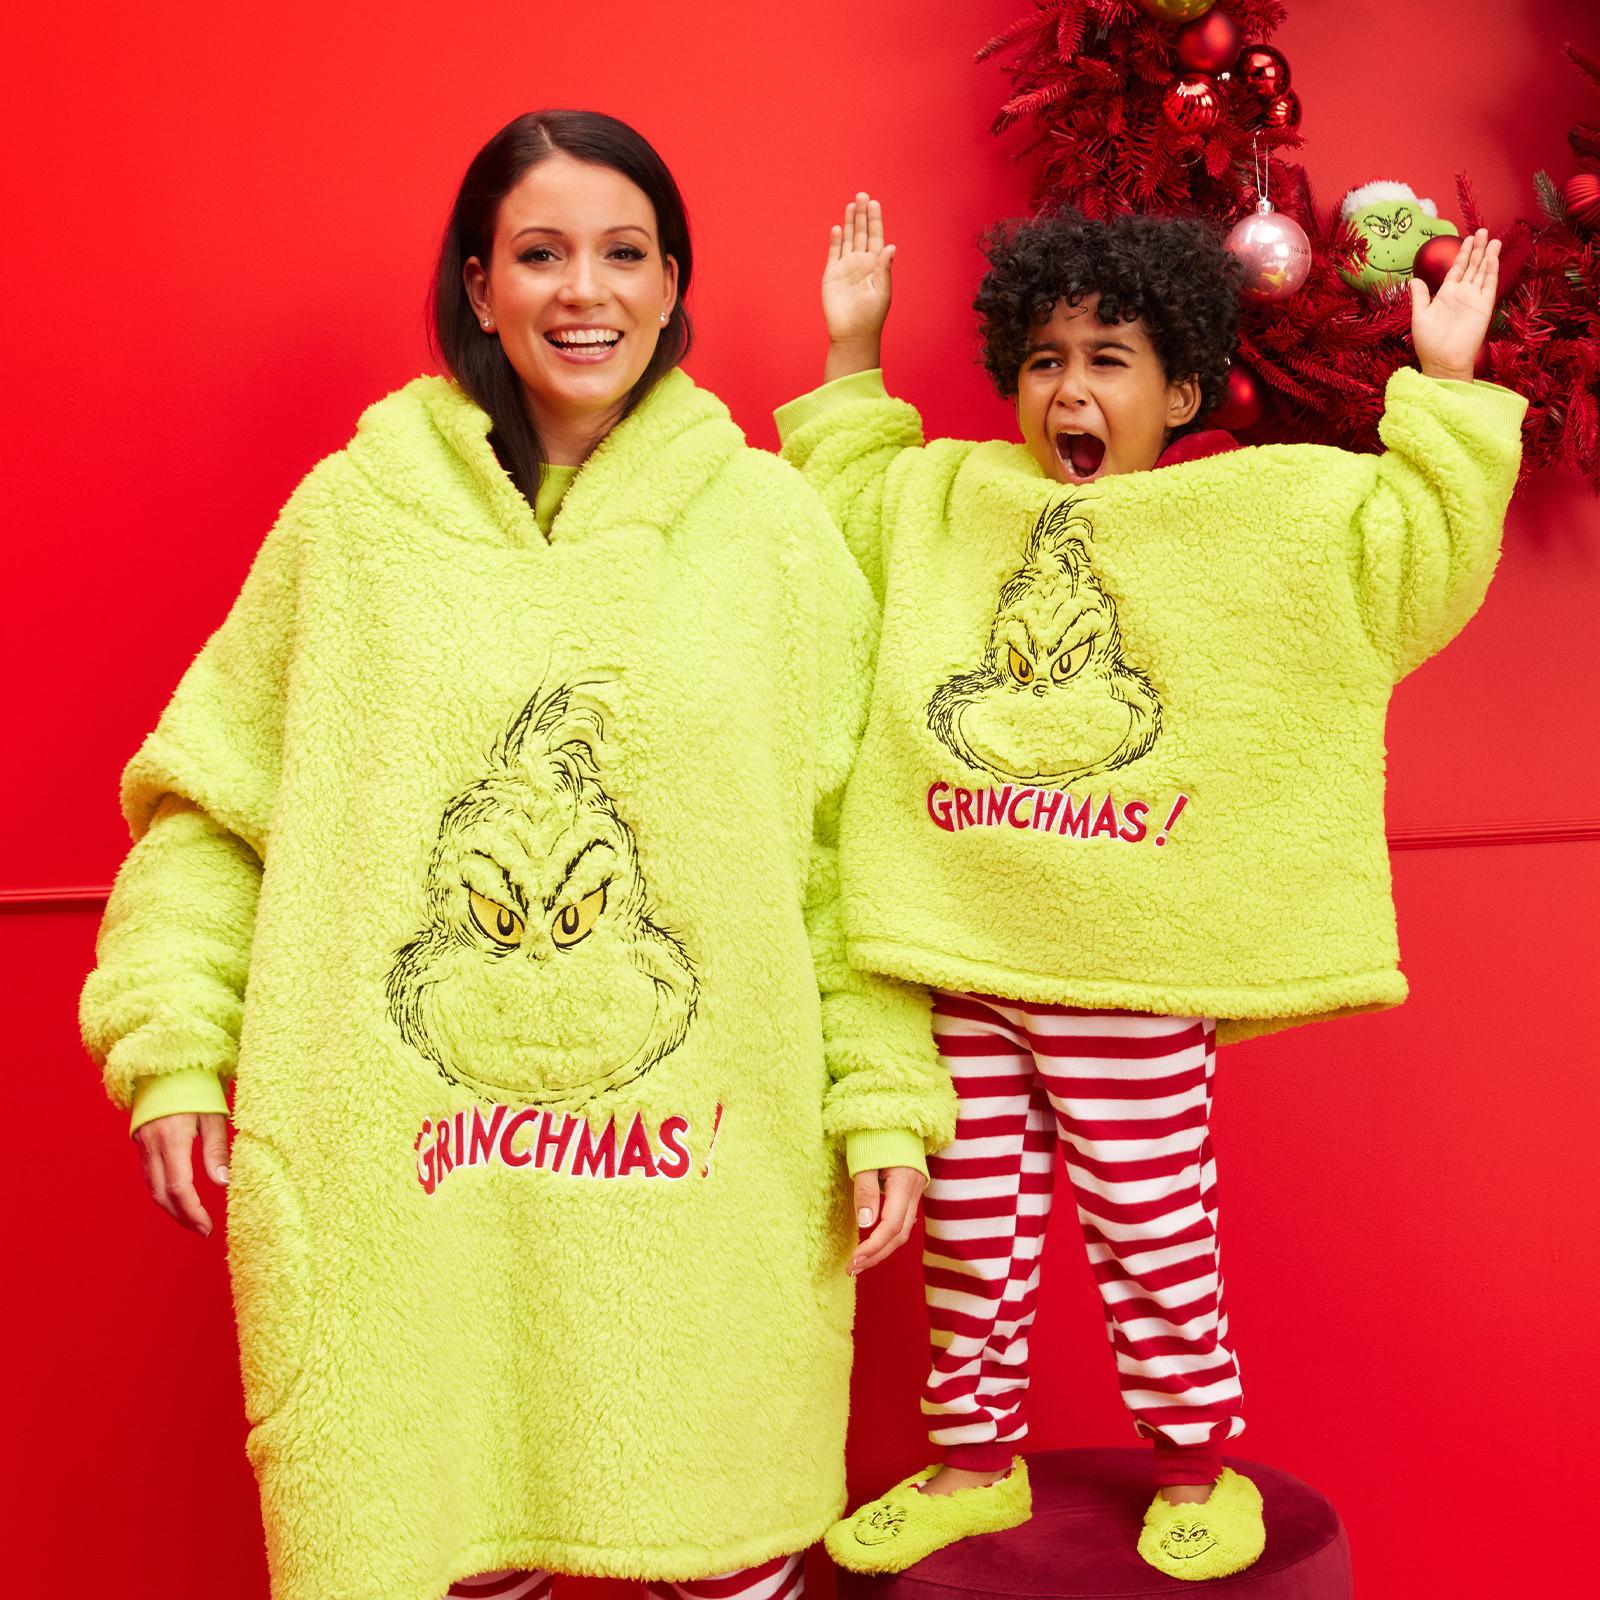 The Grinch X Primark Christmas Collection